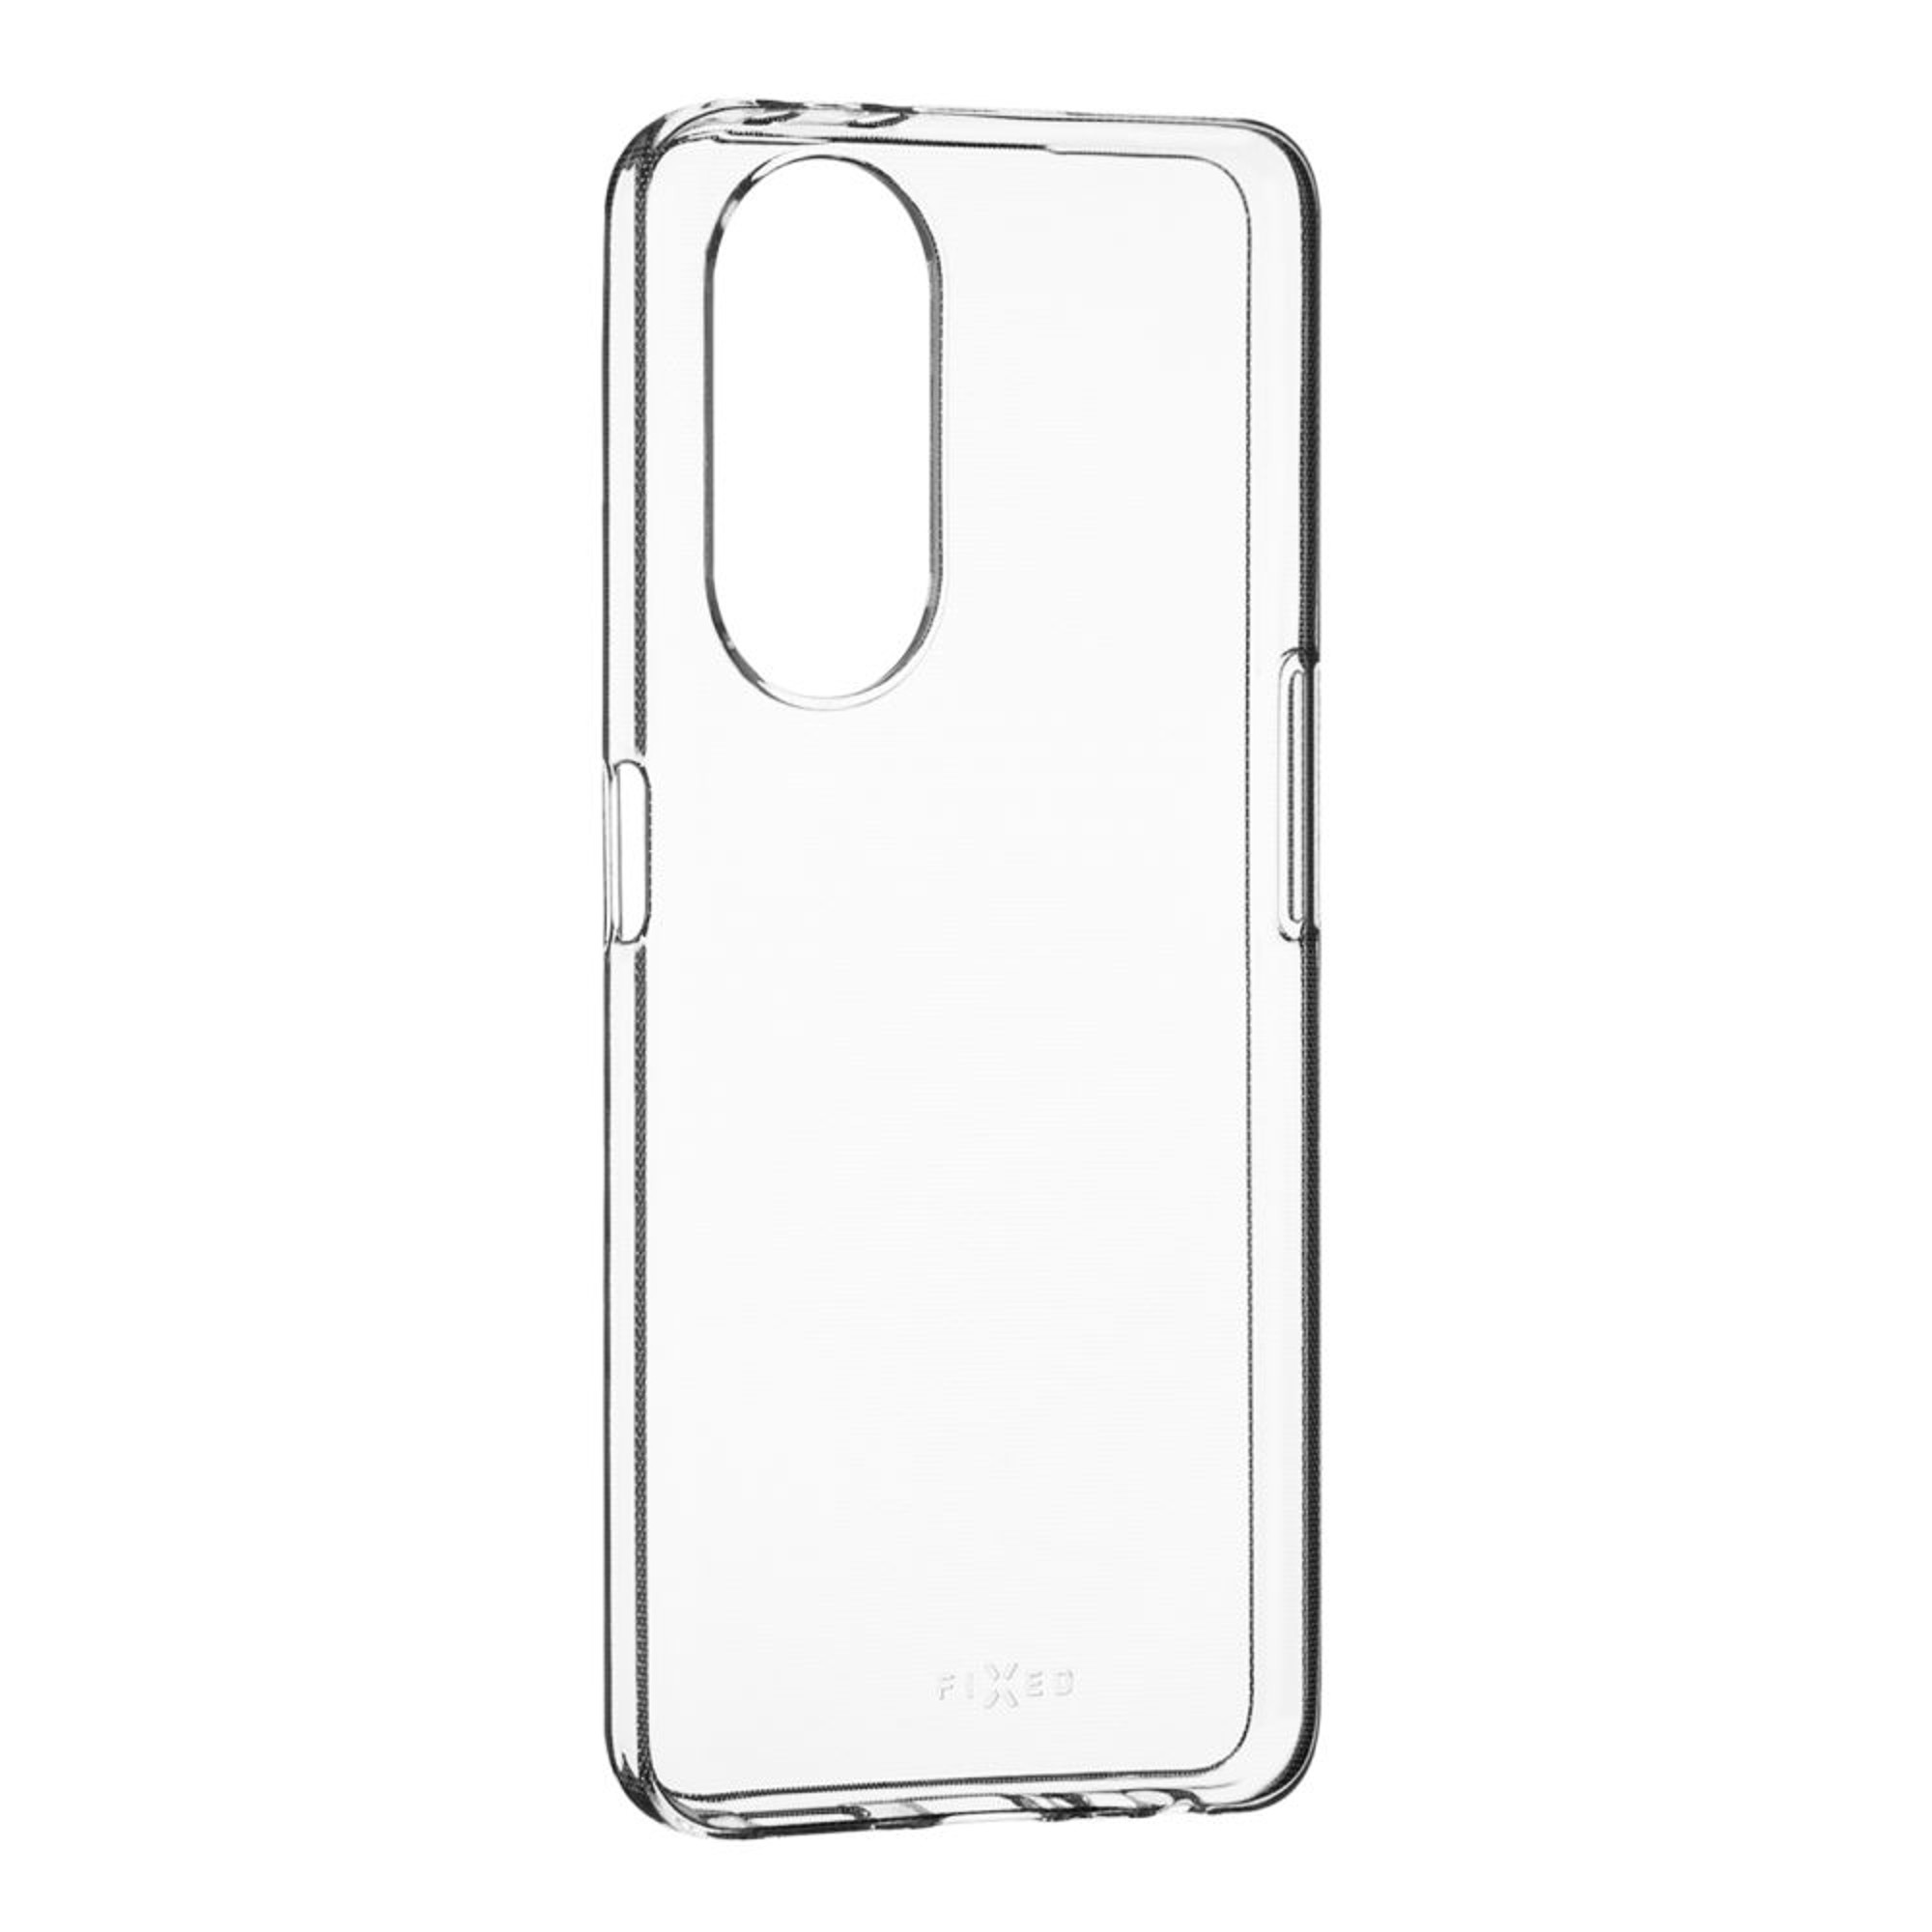 FIXED Backcover, Transparent F23 5G, Oppo, FIXTCC-1169,